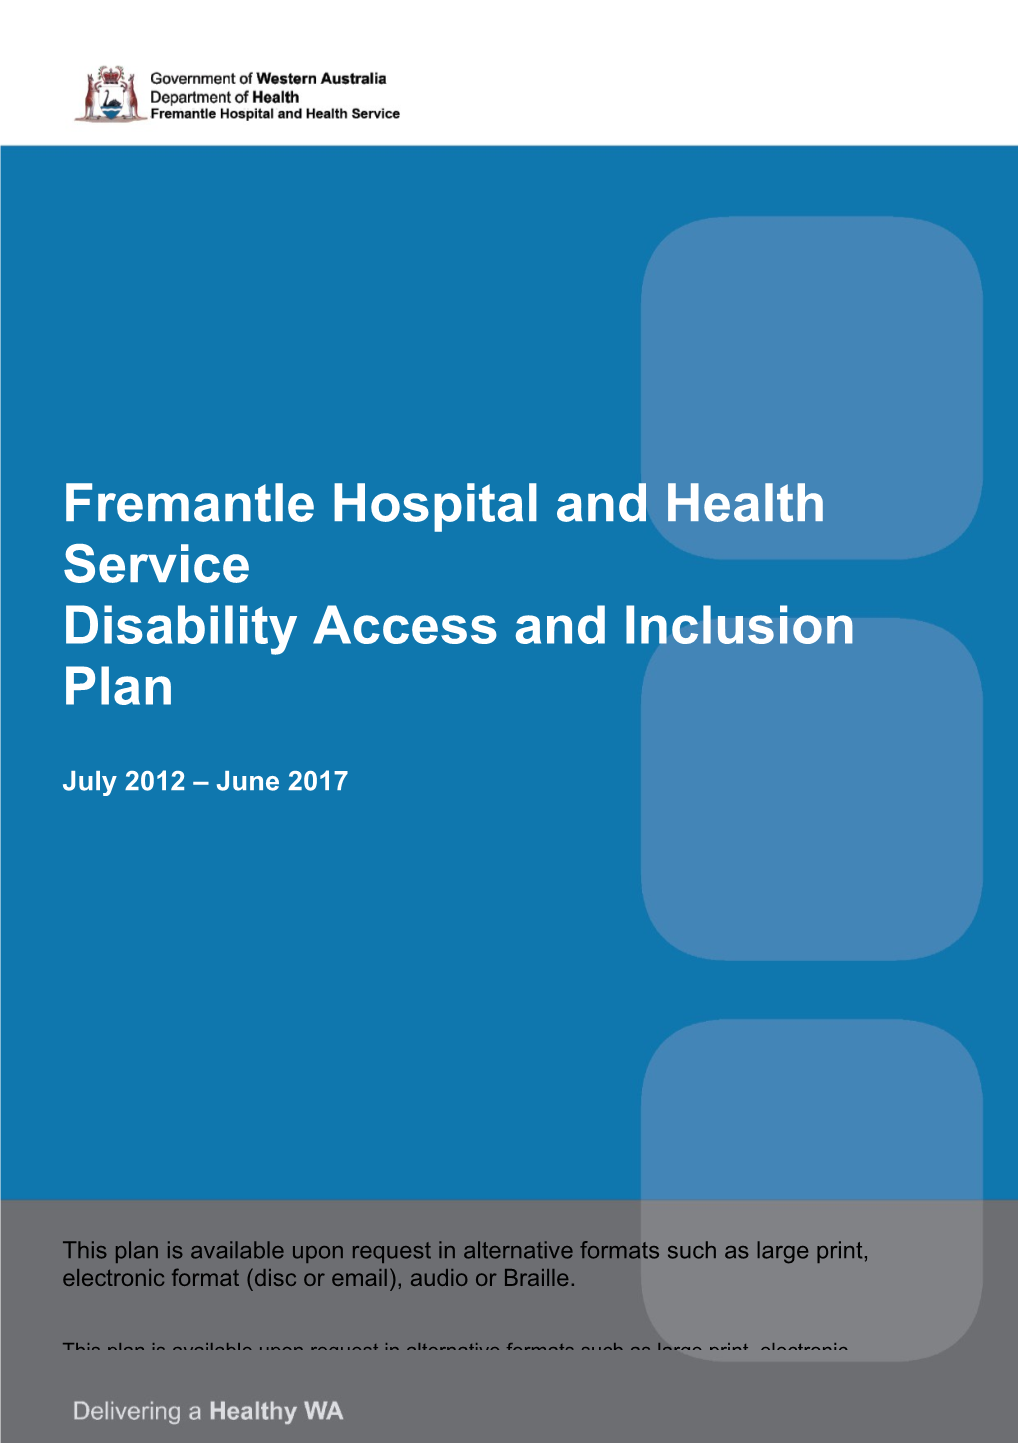 Disability Access and Inclusion Plan July 2012 - June 2017